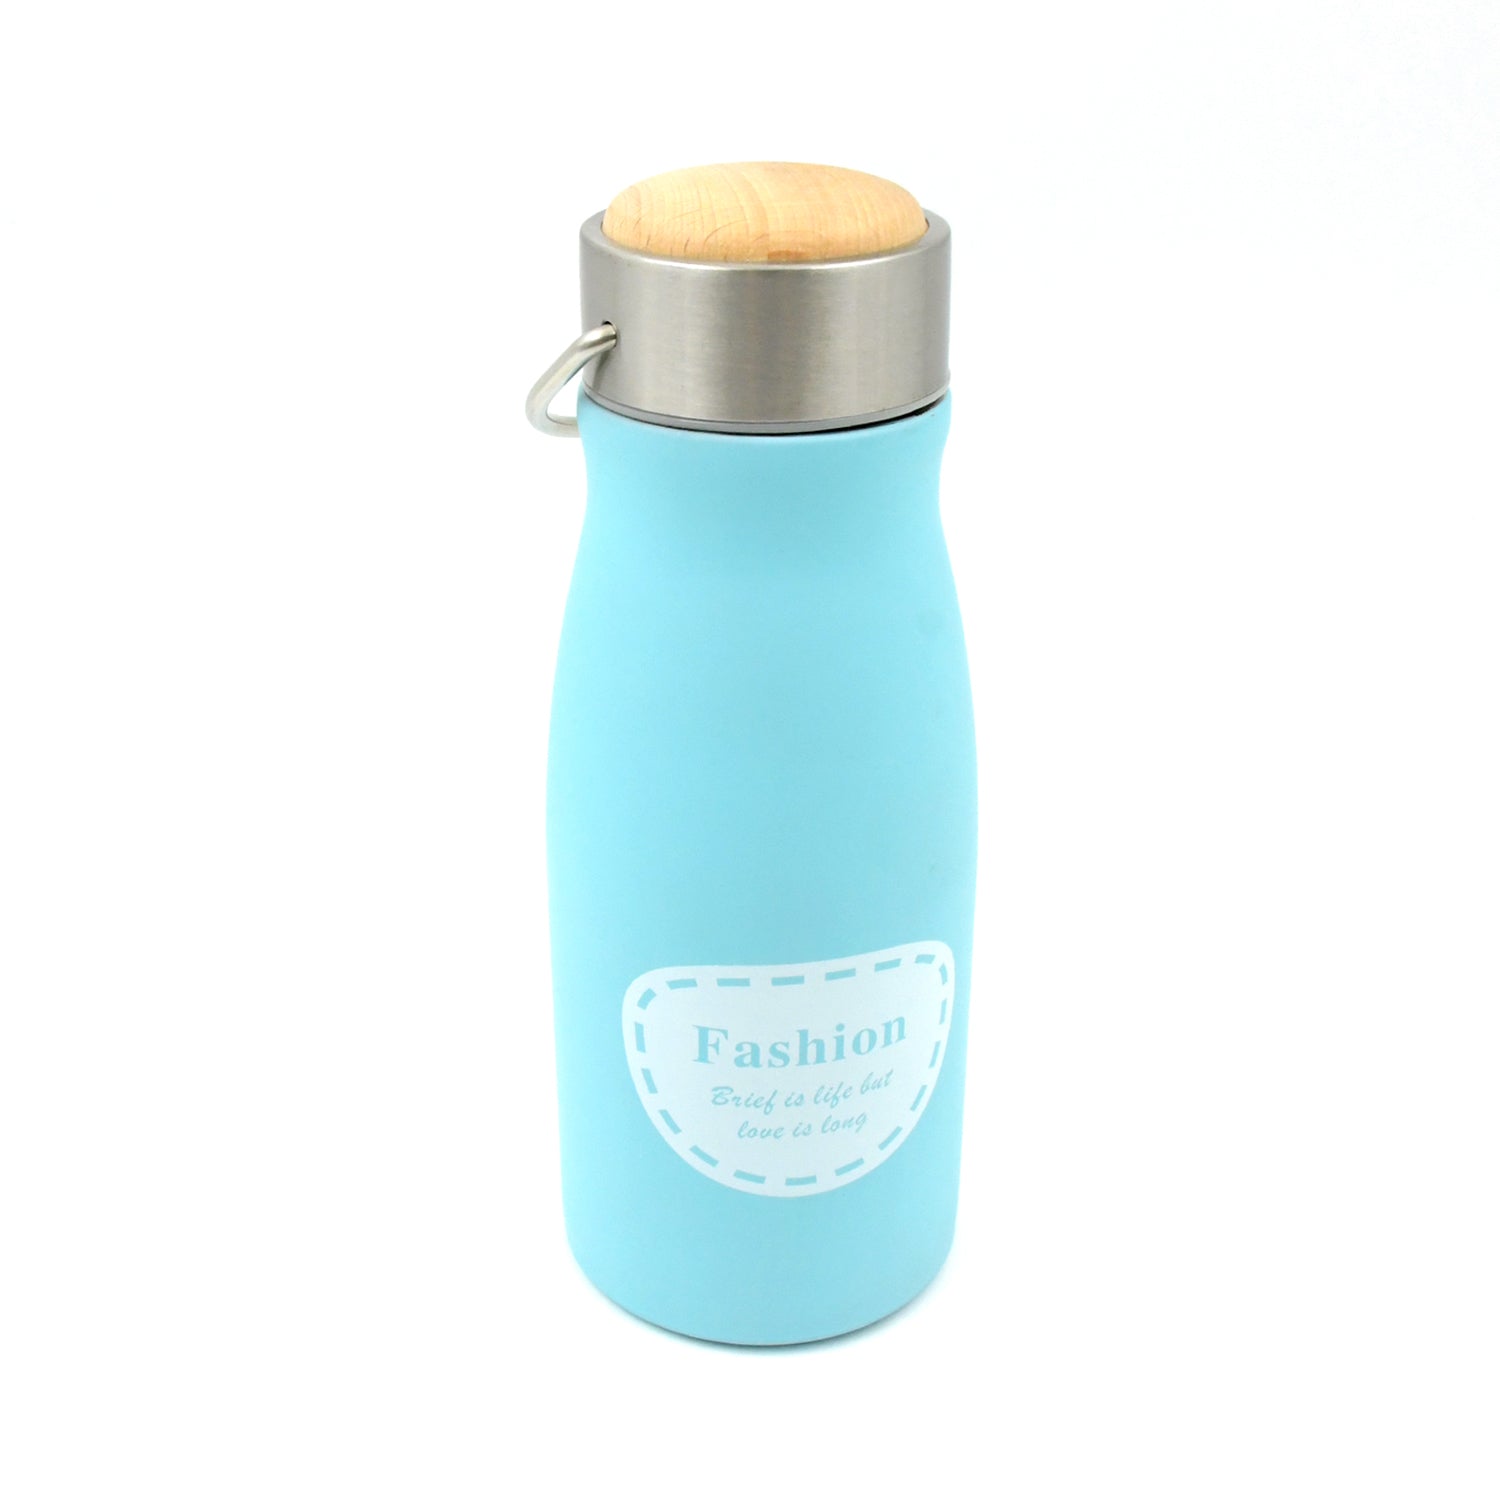 0285 Stainless Steel Water Bottle With Handle, Fridge Water Bottle, Stainless Steel Water Bottle Leak Proof, Rust Proof, Hot & Cold Drinks, Gym Sipper BPA Free Food Grade Quality, Steel fridge Bottle For office/Gym/School (360 ML)